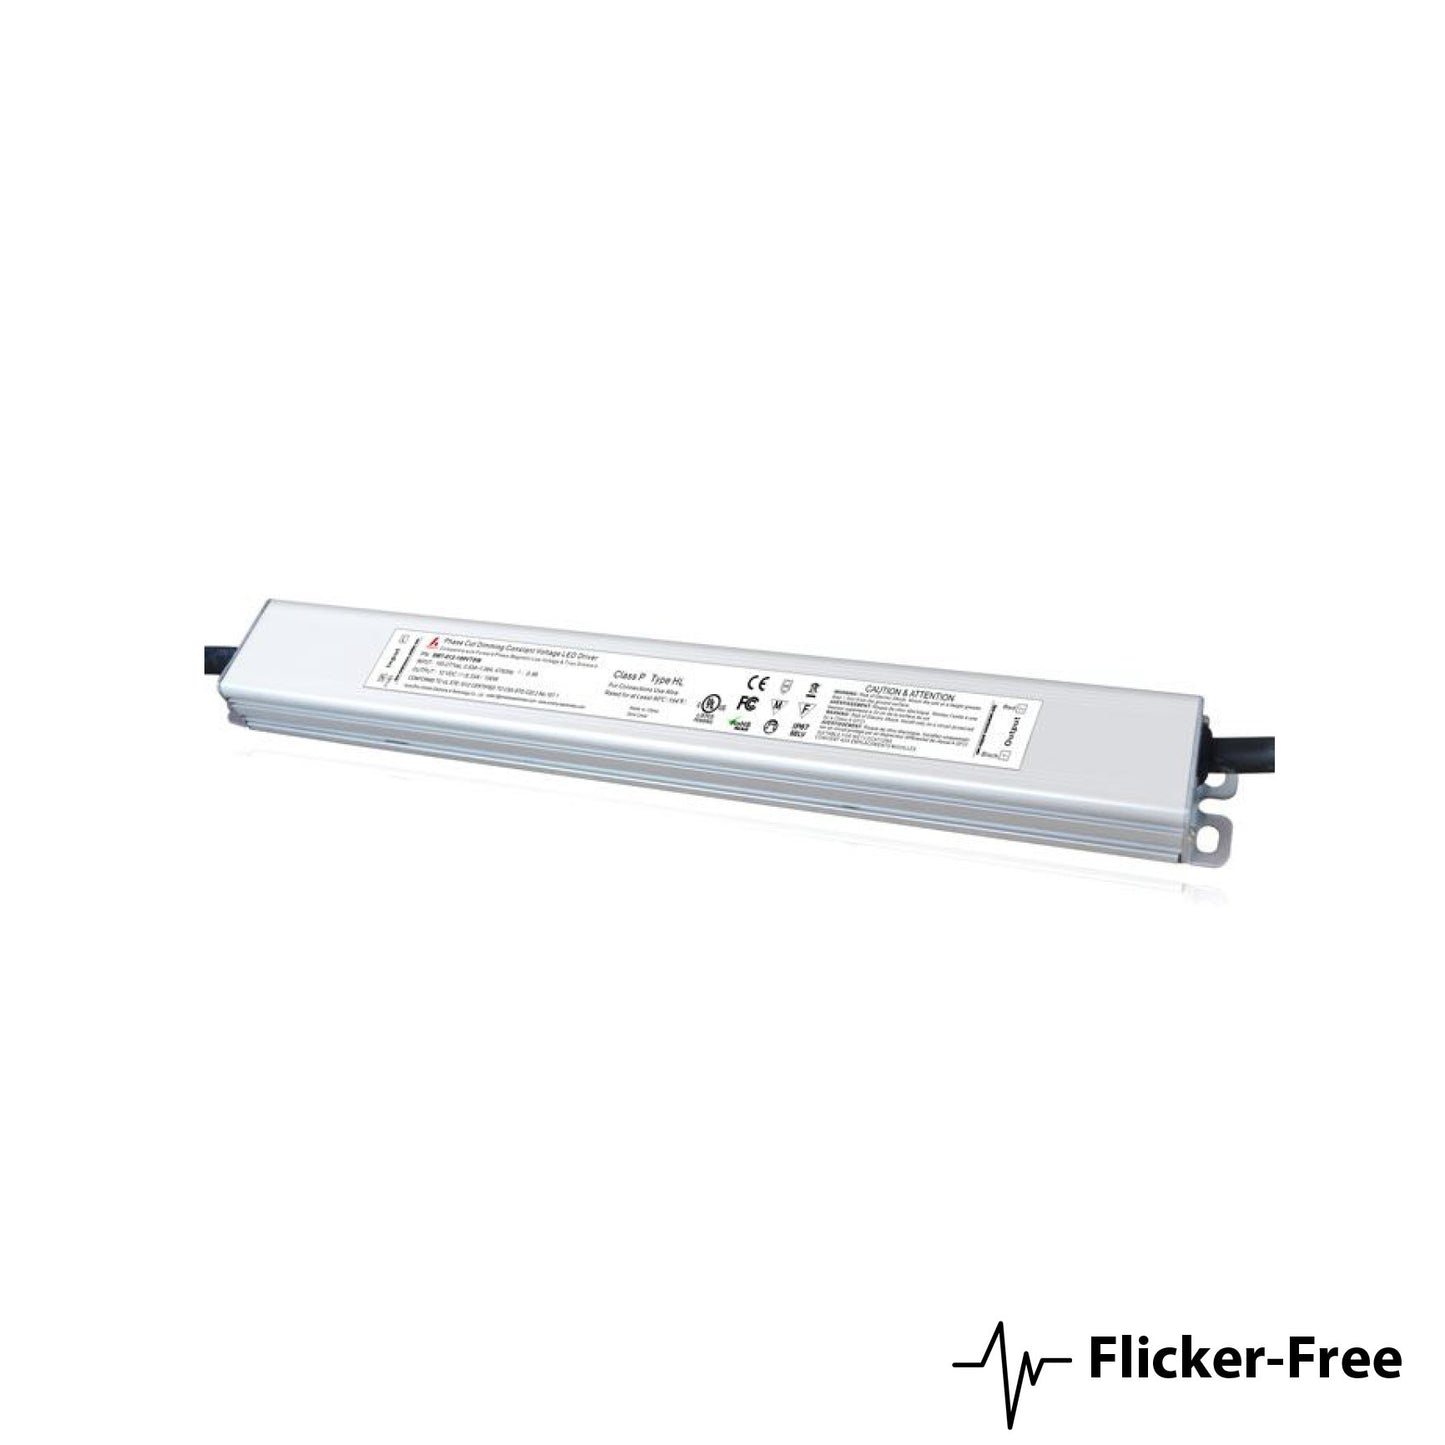 CENTRIC SERIES™ Flicker-Free Dimmable Power Supply for LED Strip